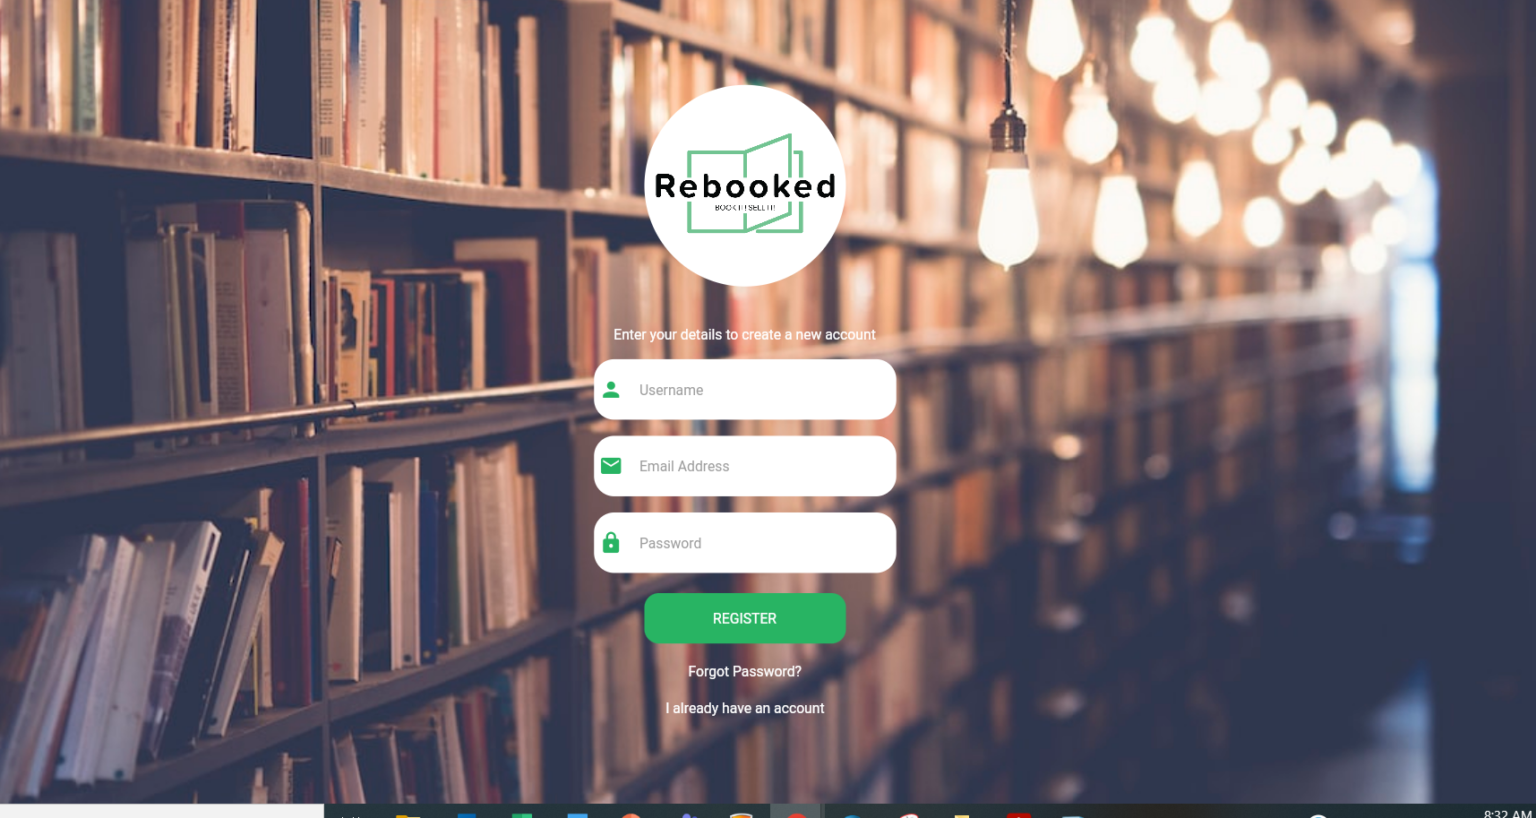 The Rebooked app helps SA students optimize textbooks